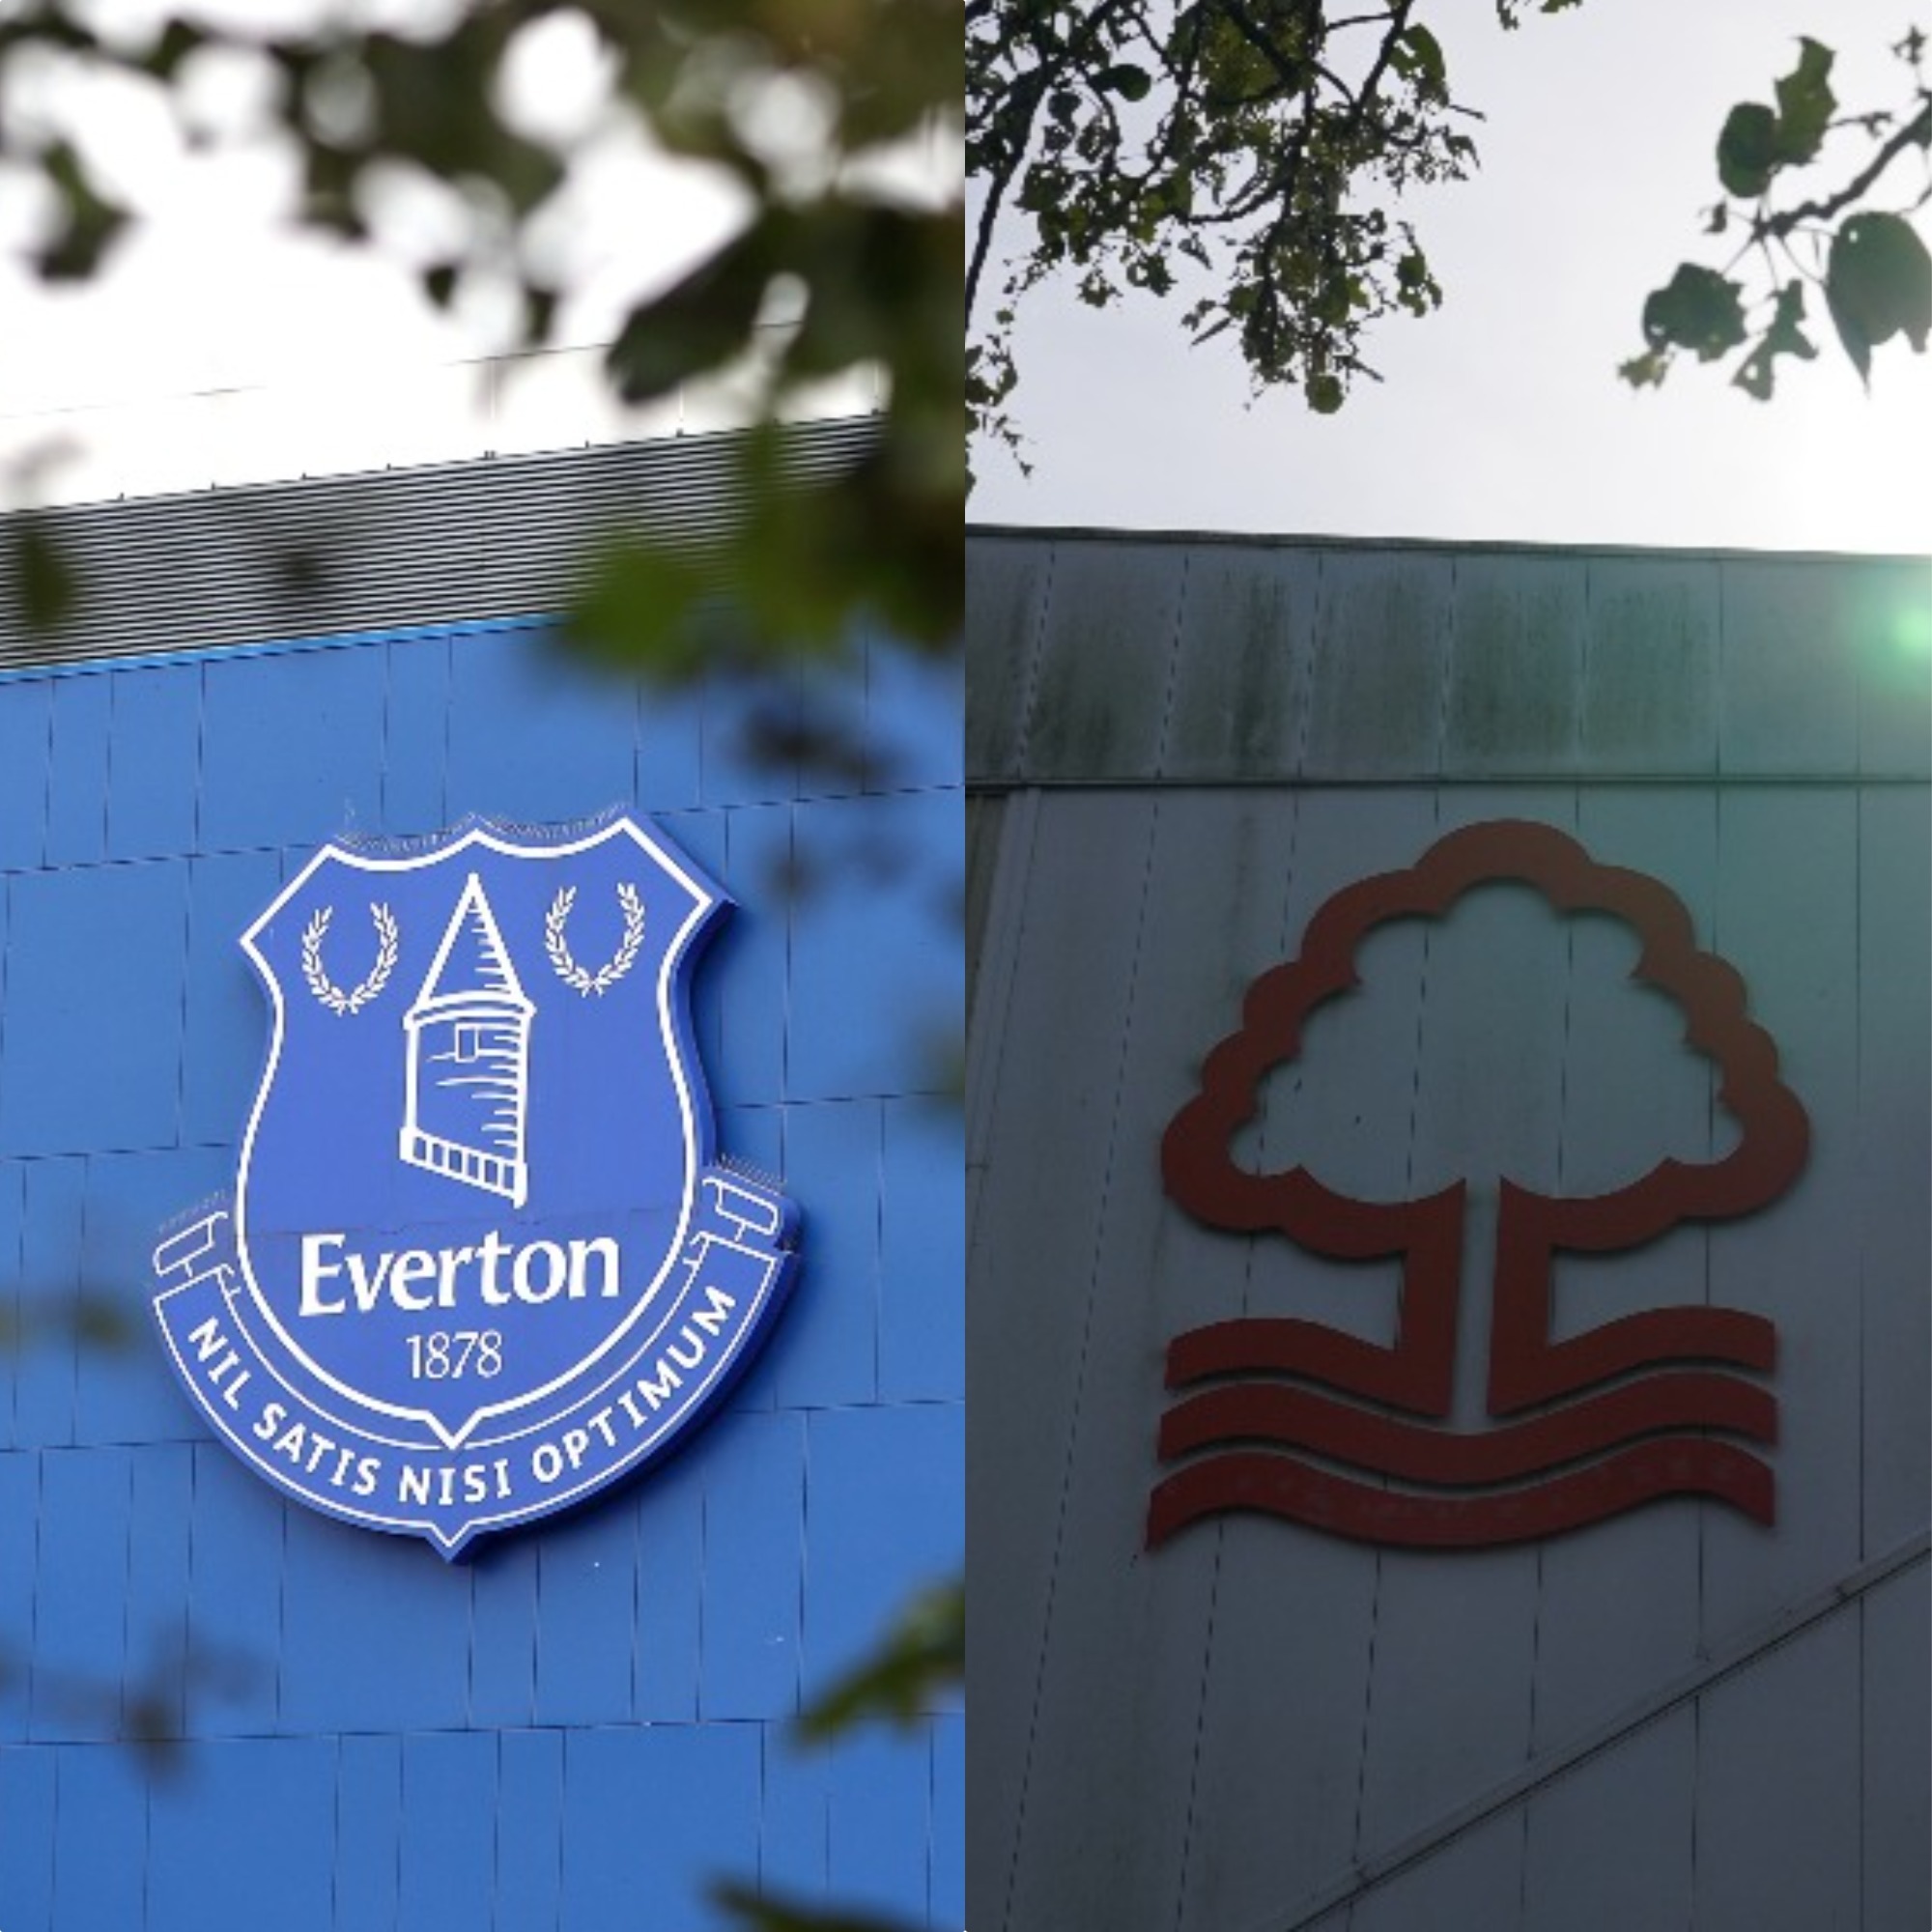 Everton and Nottingham Forest both had PSR complaints laid against them on January 15 